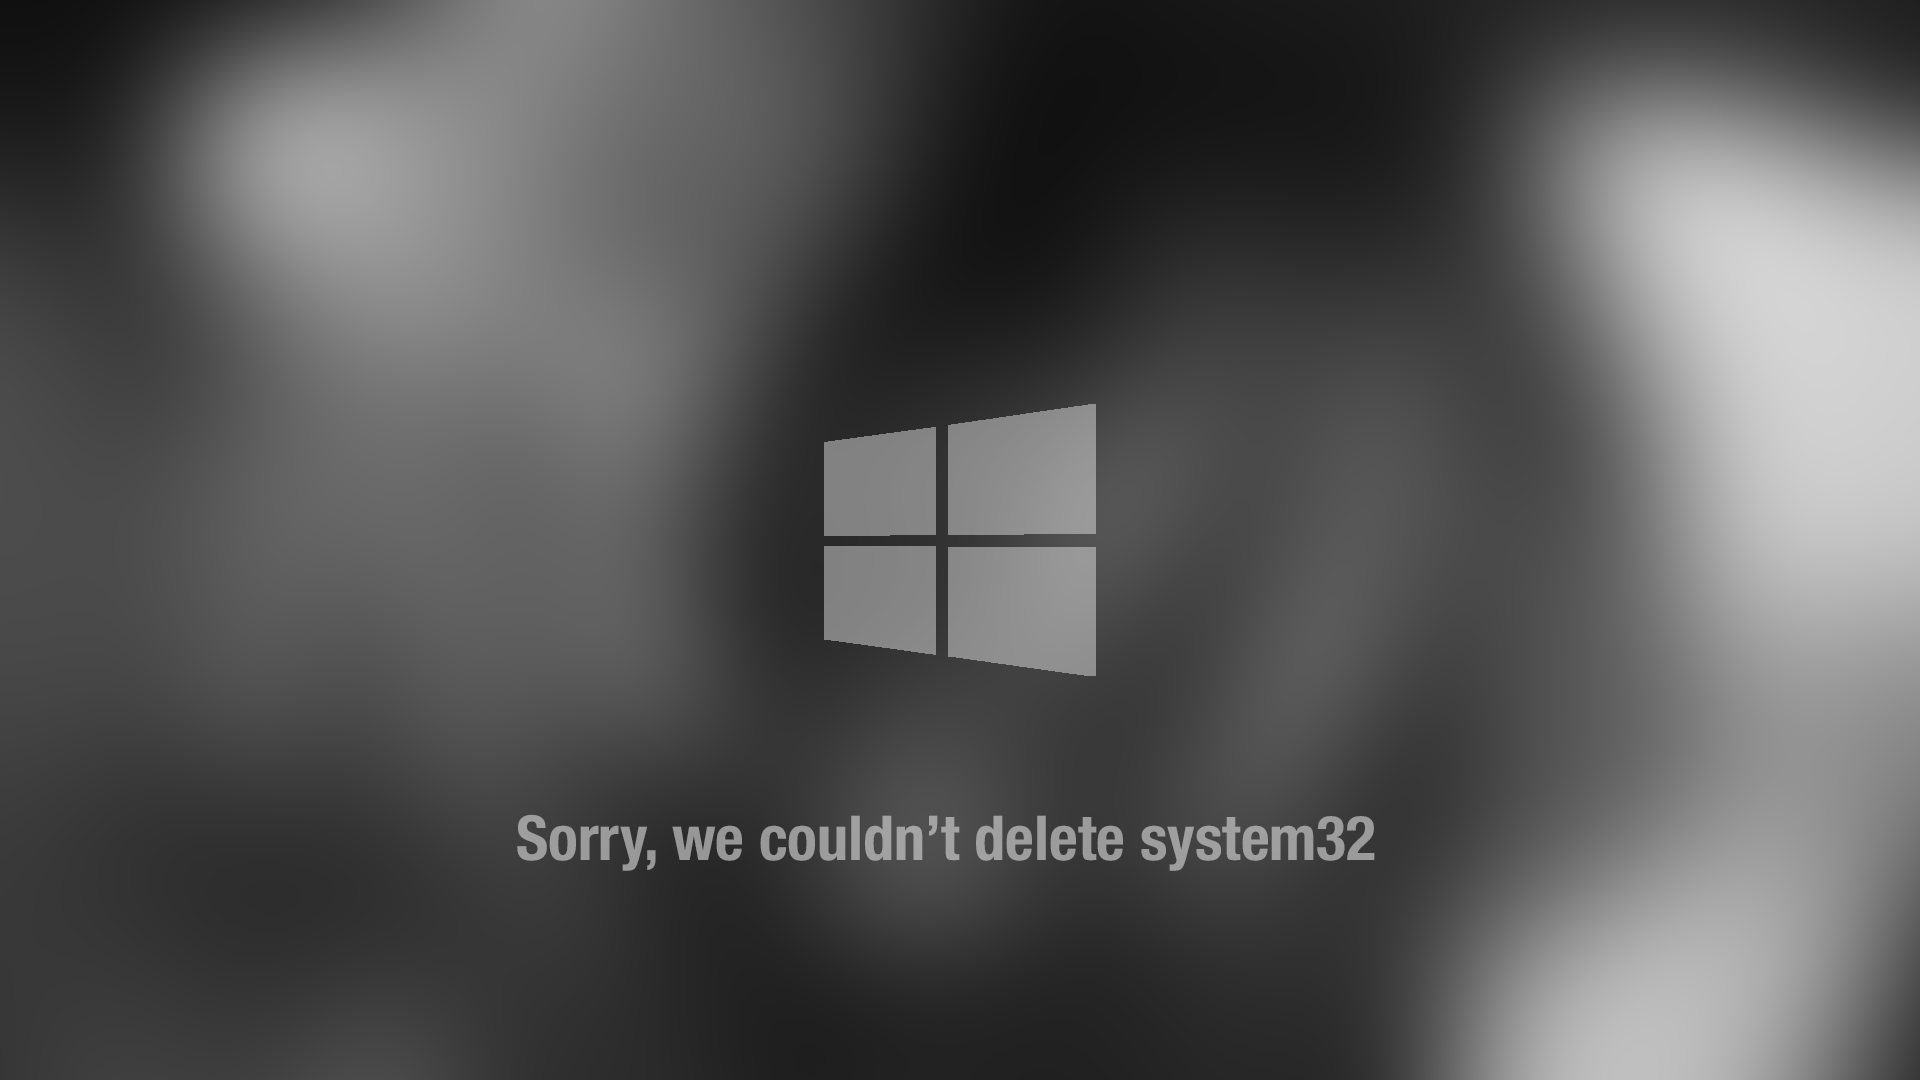 Sorry, we couldn't delete system32